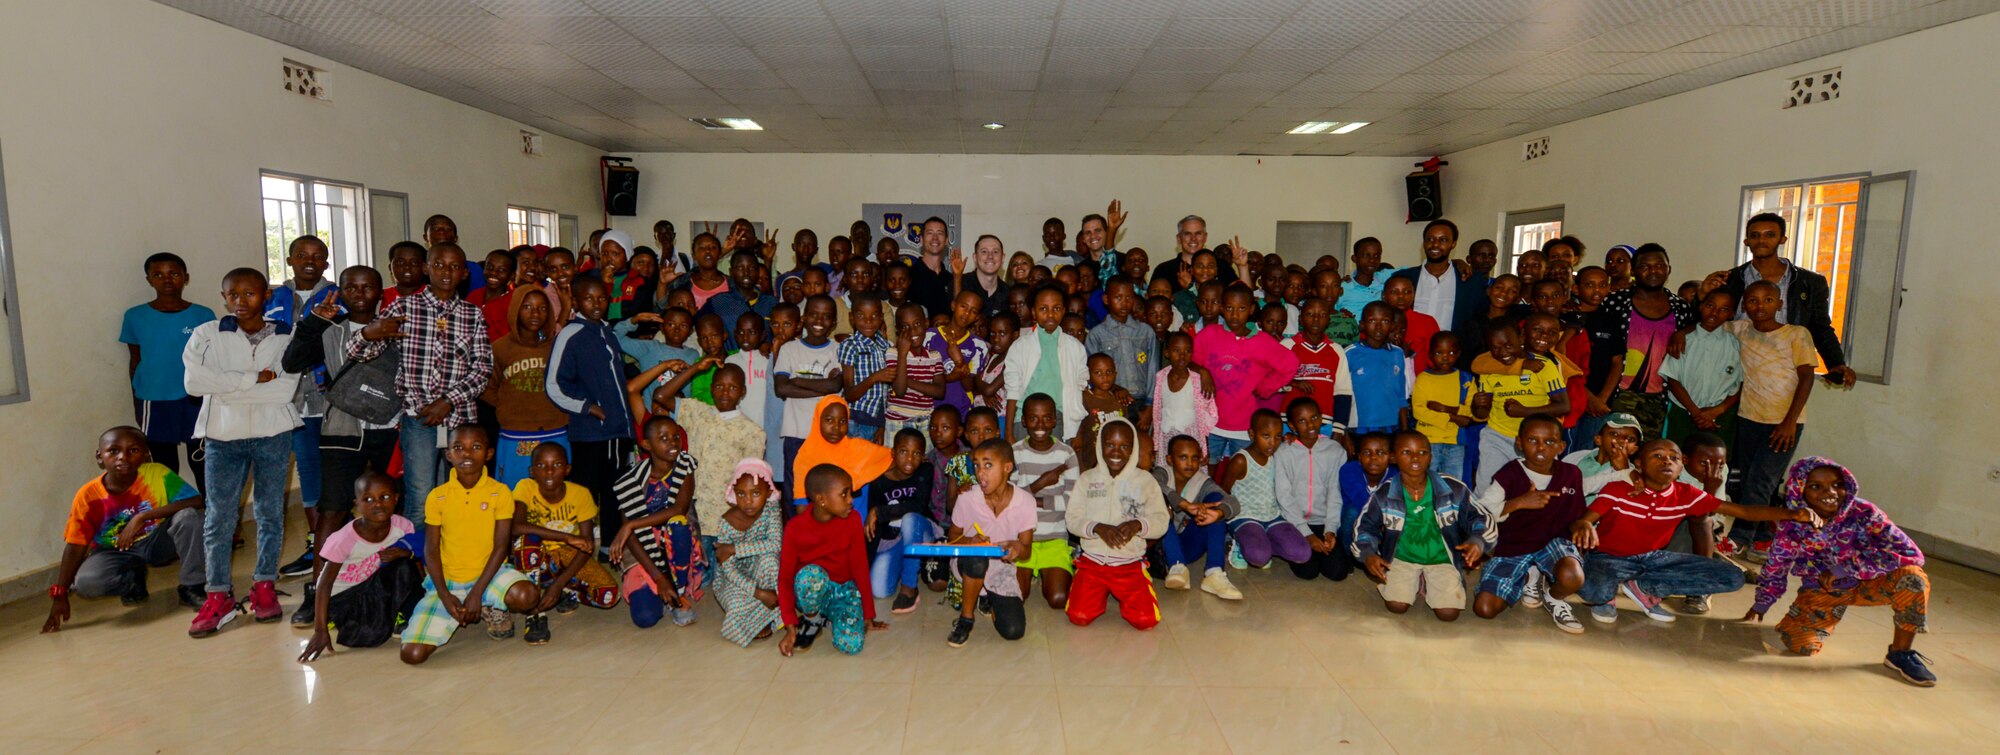 U.S. Airmen assigned to the U.S. Air Forces in Europe Band Touch N' Go pose for a photo with students and staff members at the Gisimba Memorial Centre in Kigali, Rwanda, March 6, 2019. As musical ambassadors, members of the band can reach audiences that traditional military members can't. They travel the world to build cultural bridges, and honor and preserve cultural heritage. (U.S. Air Force photo by Tech. Sgt. Timothy Moore)